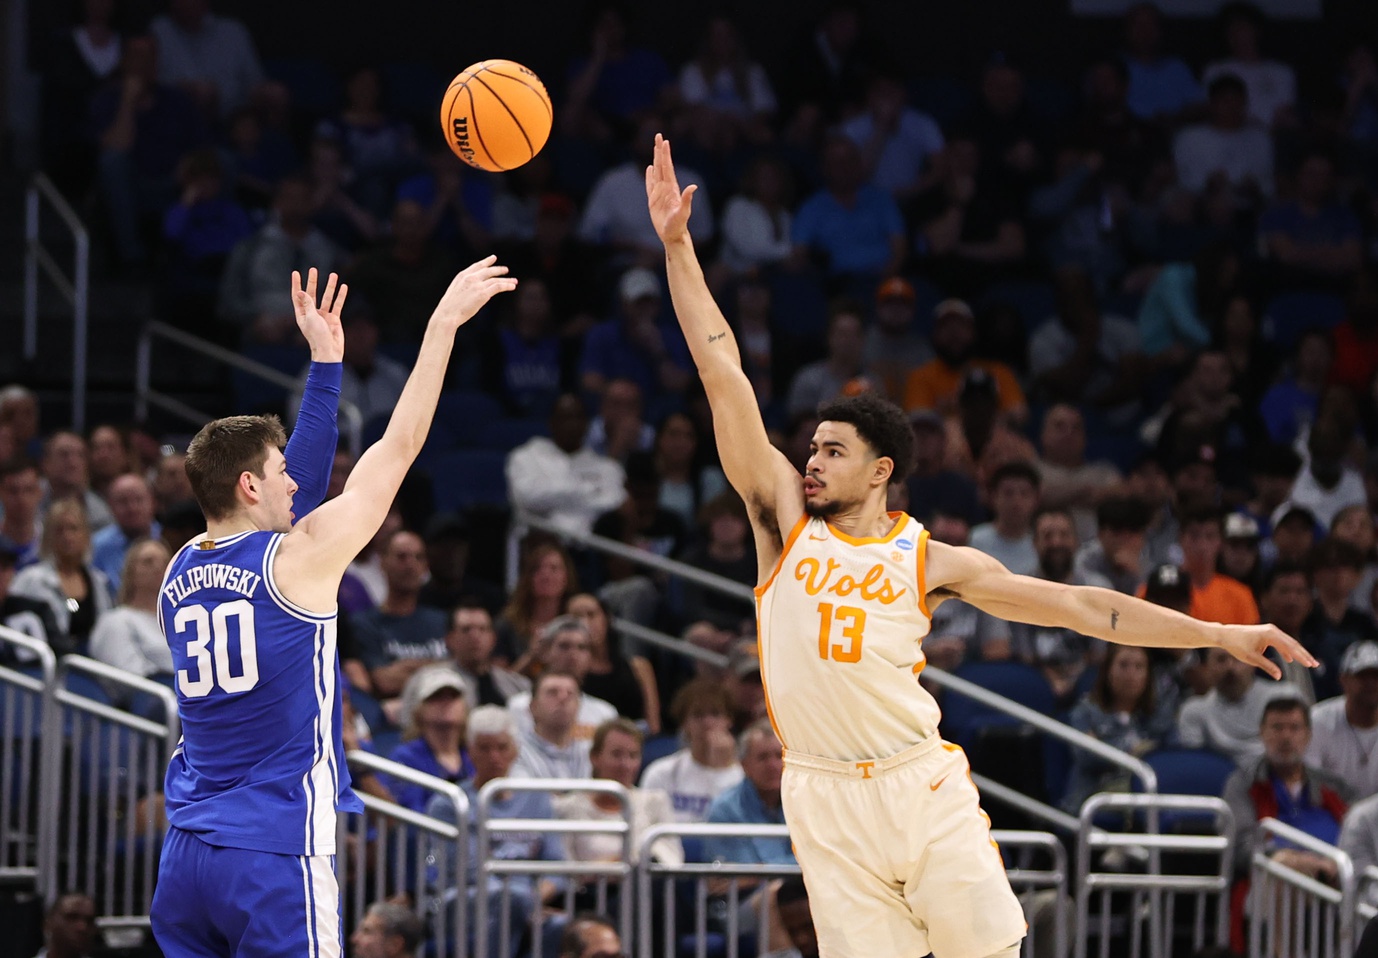 Mar 18, 2023; Orlando, FL, USA; Duke Blue Devils center Kyle Filipowski (30) shoots over Tennessee Volunteers forward Olivier Nkamhoua (13) during the second half in the second round of the 2023 NCAA Tournament at Legacy Arena. Mandatory Credit: Matt Pendleton-USA TODAY Sports